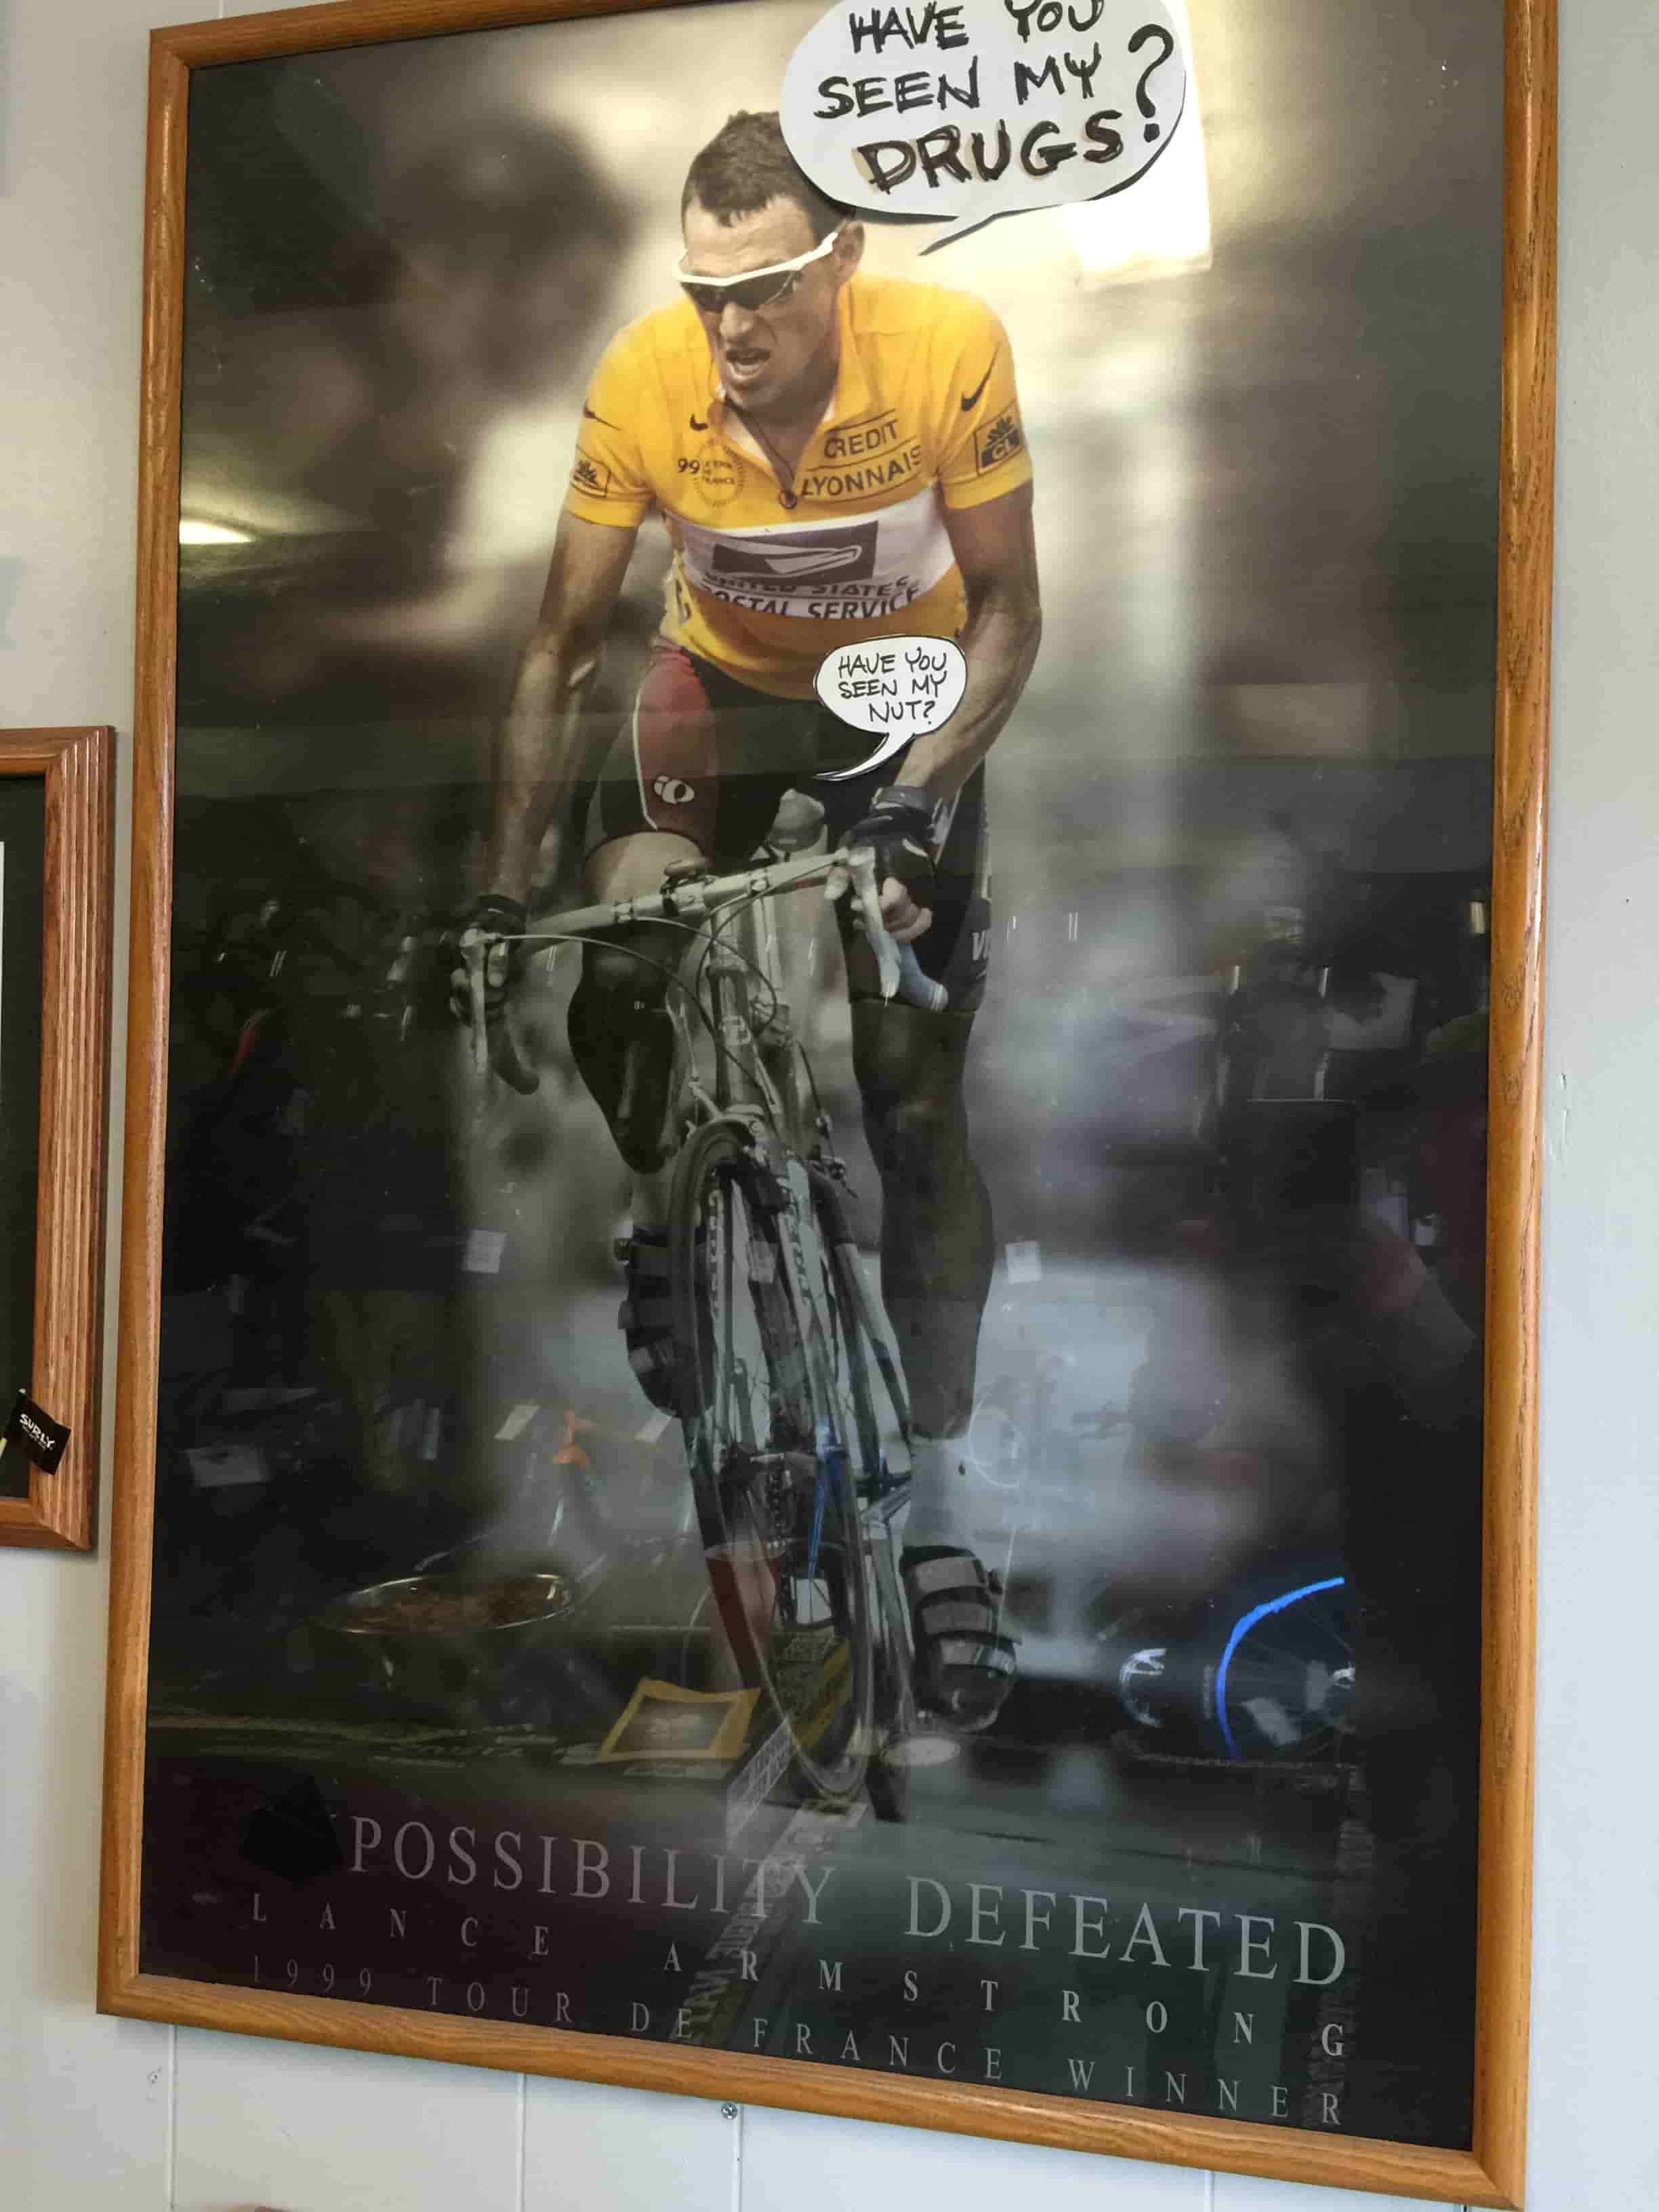 Framed posted of a front view of cyclist Lance Armstrong, riding a bike